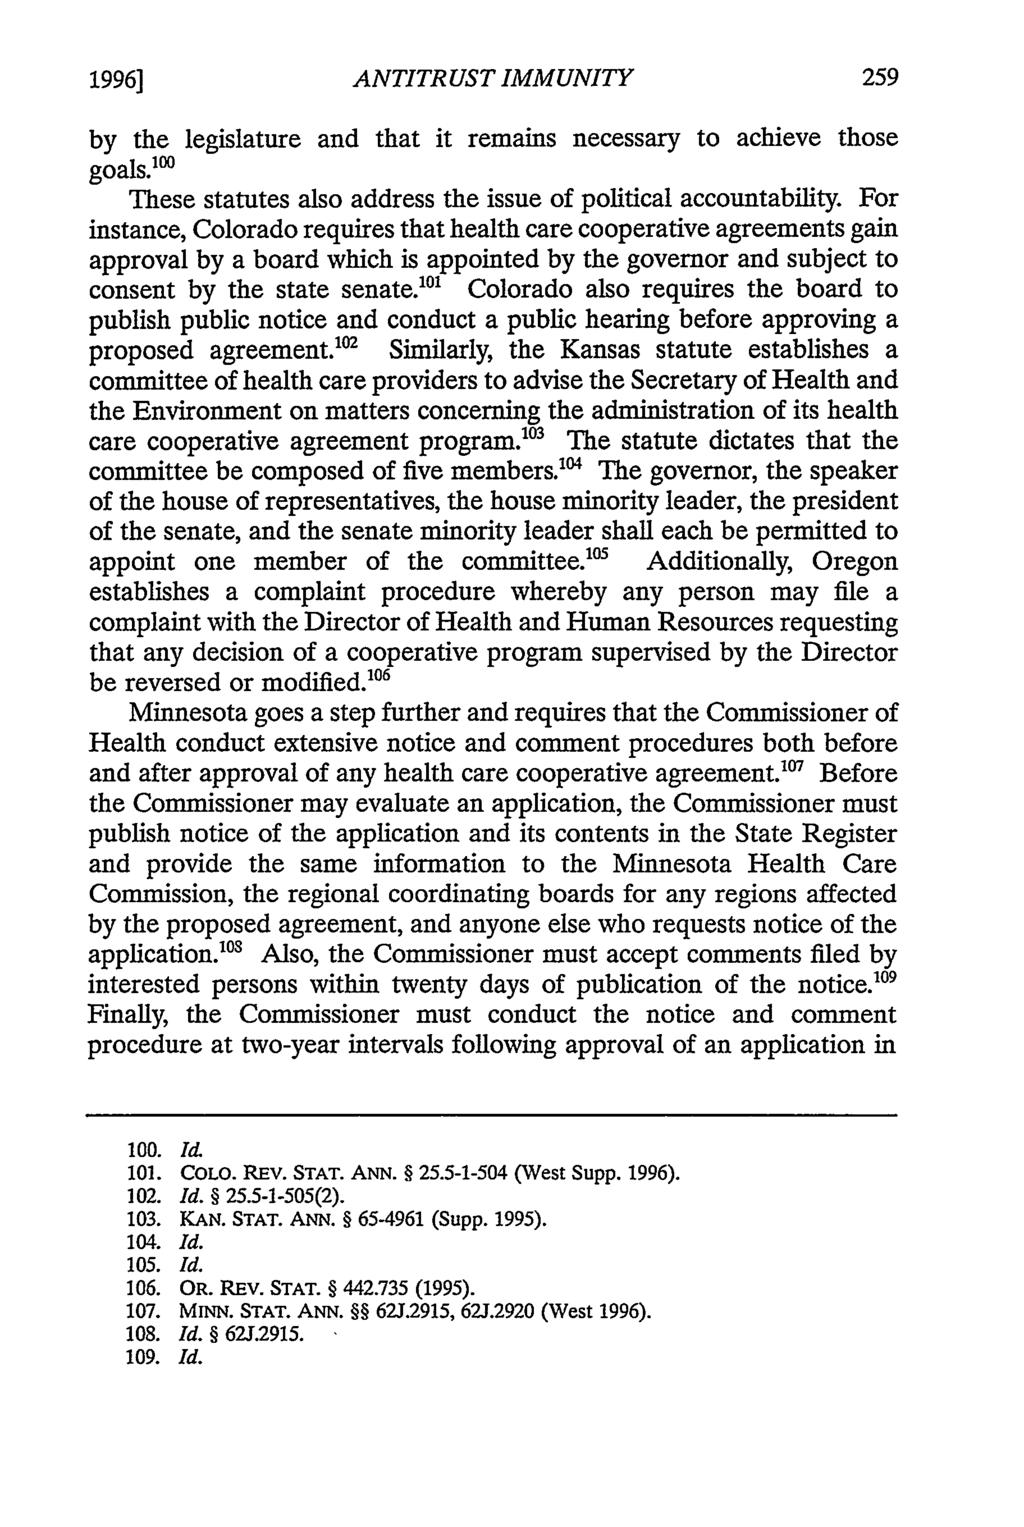 1996] ANTITRUST IMMUNITY by the legislature and that it remains necessary to achieve those goals.' These statutes also address the issue of political accountability.